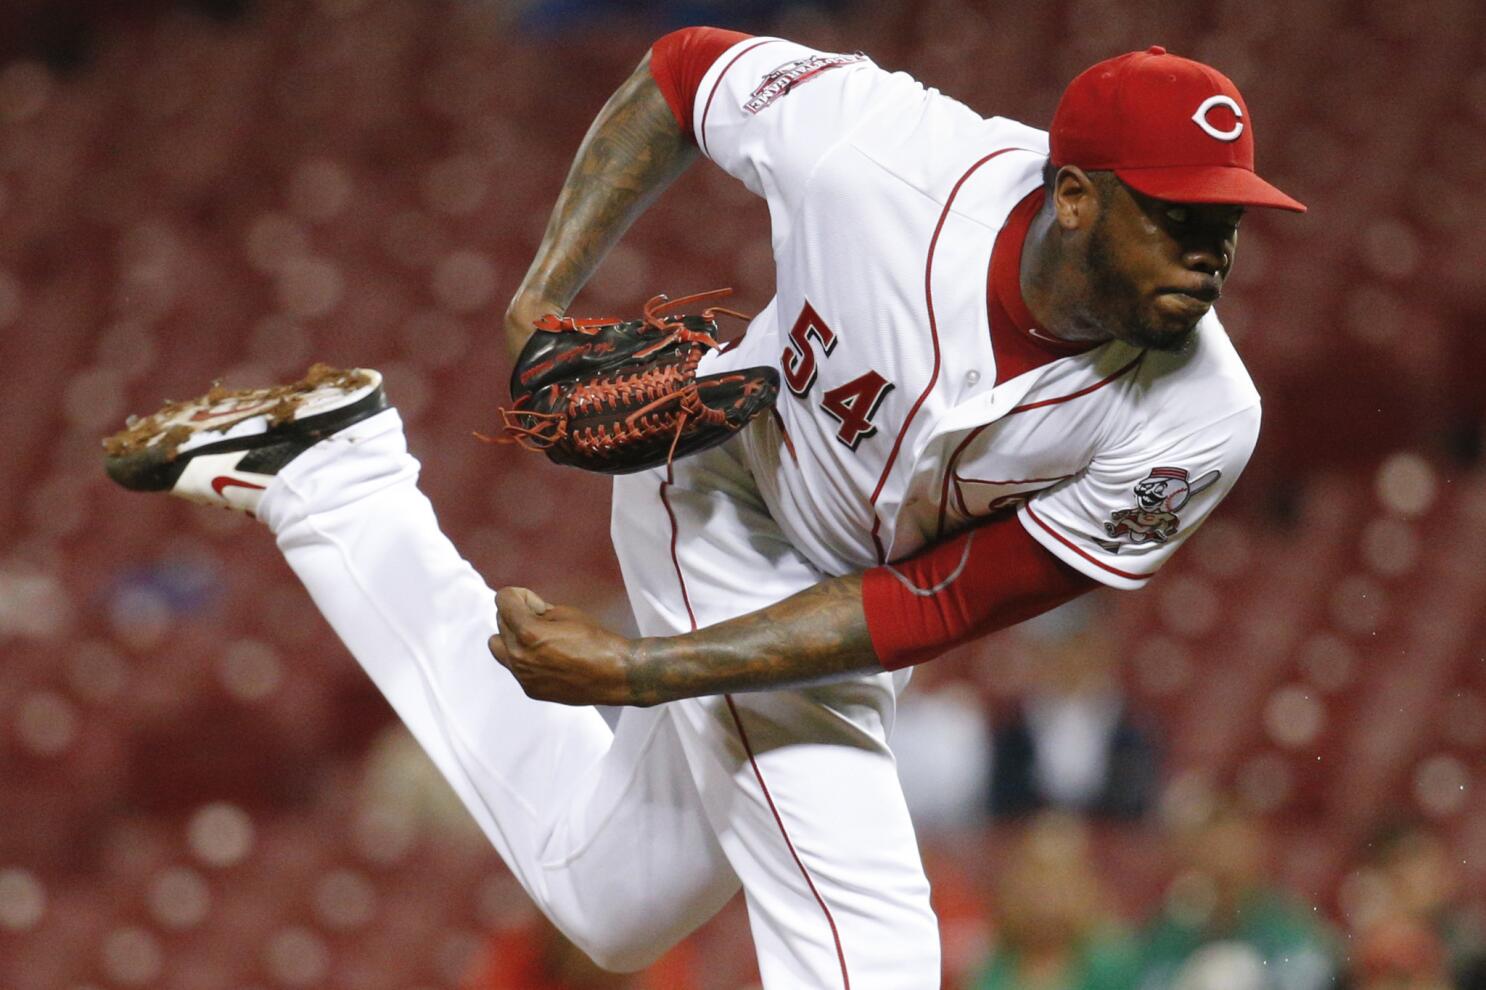 Yankees pitcher Aroldis Chapman will not face charges over domestic  violence, MLB